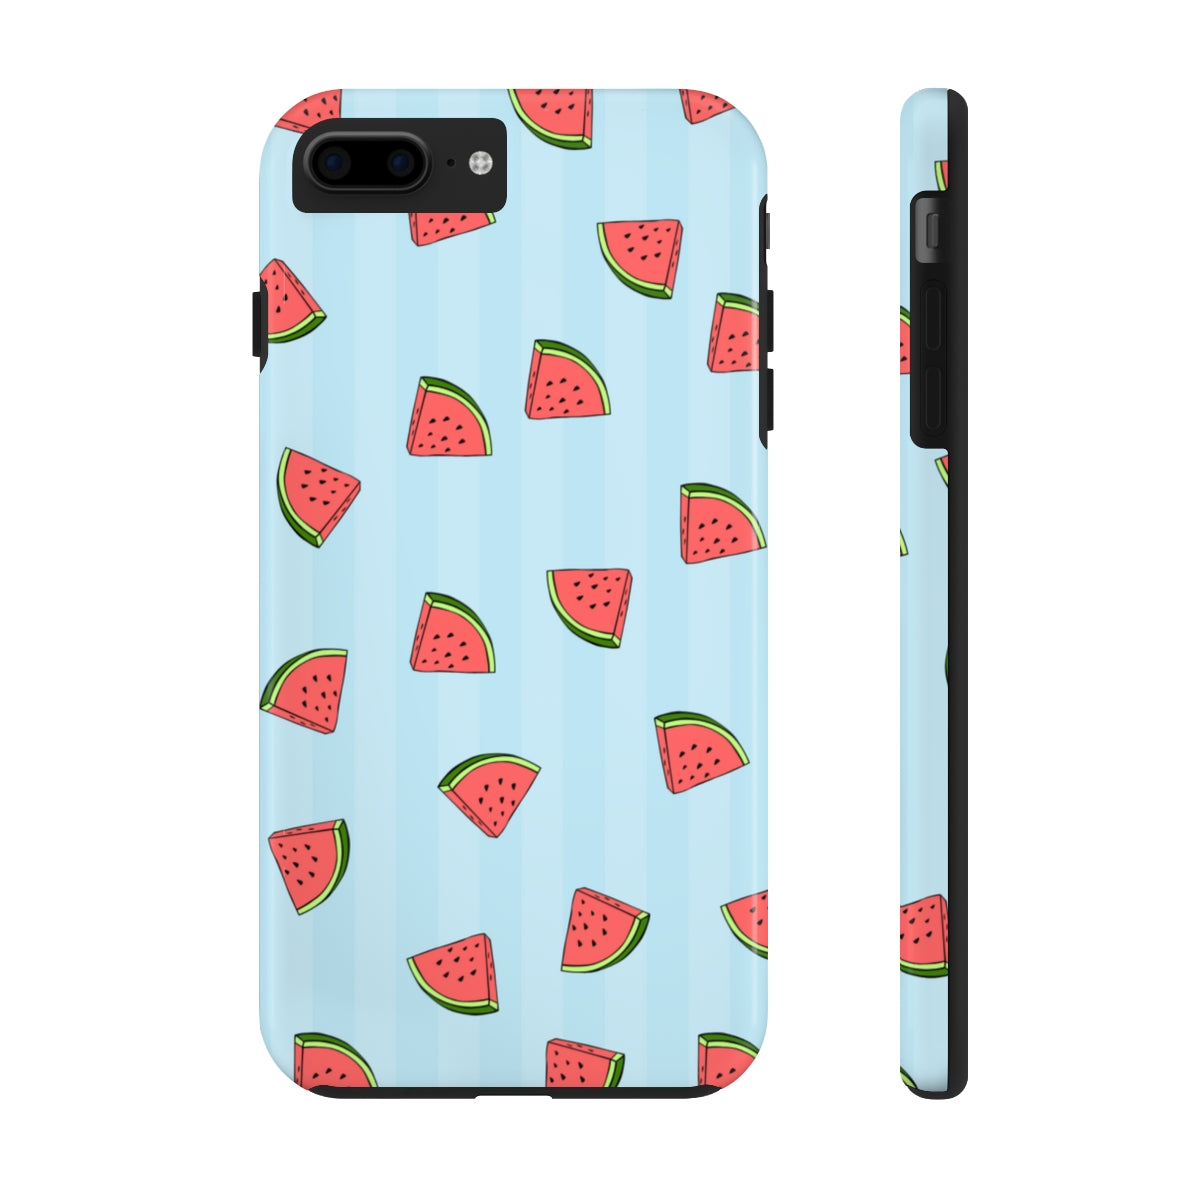 (iPHONE 5 TO XR) Watermelon Pattern Tough Phone Cases